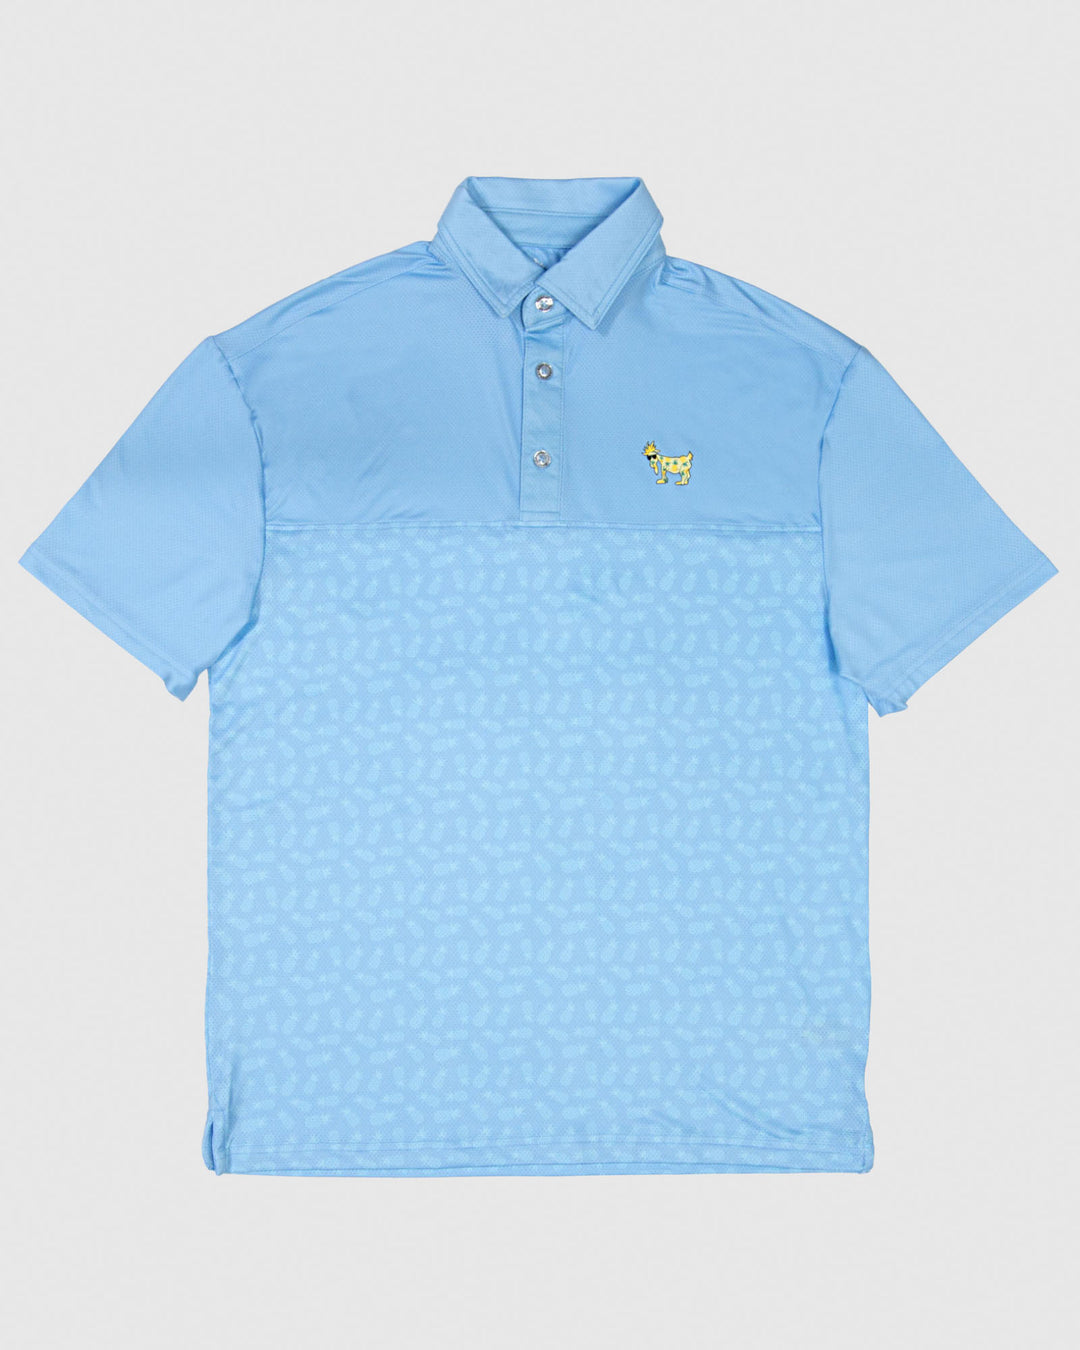 Blue polo with pinenapple goat and subtle pineapple print